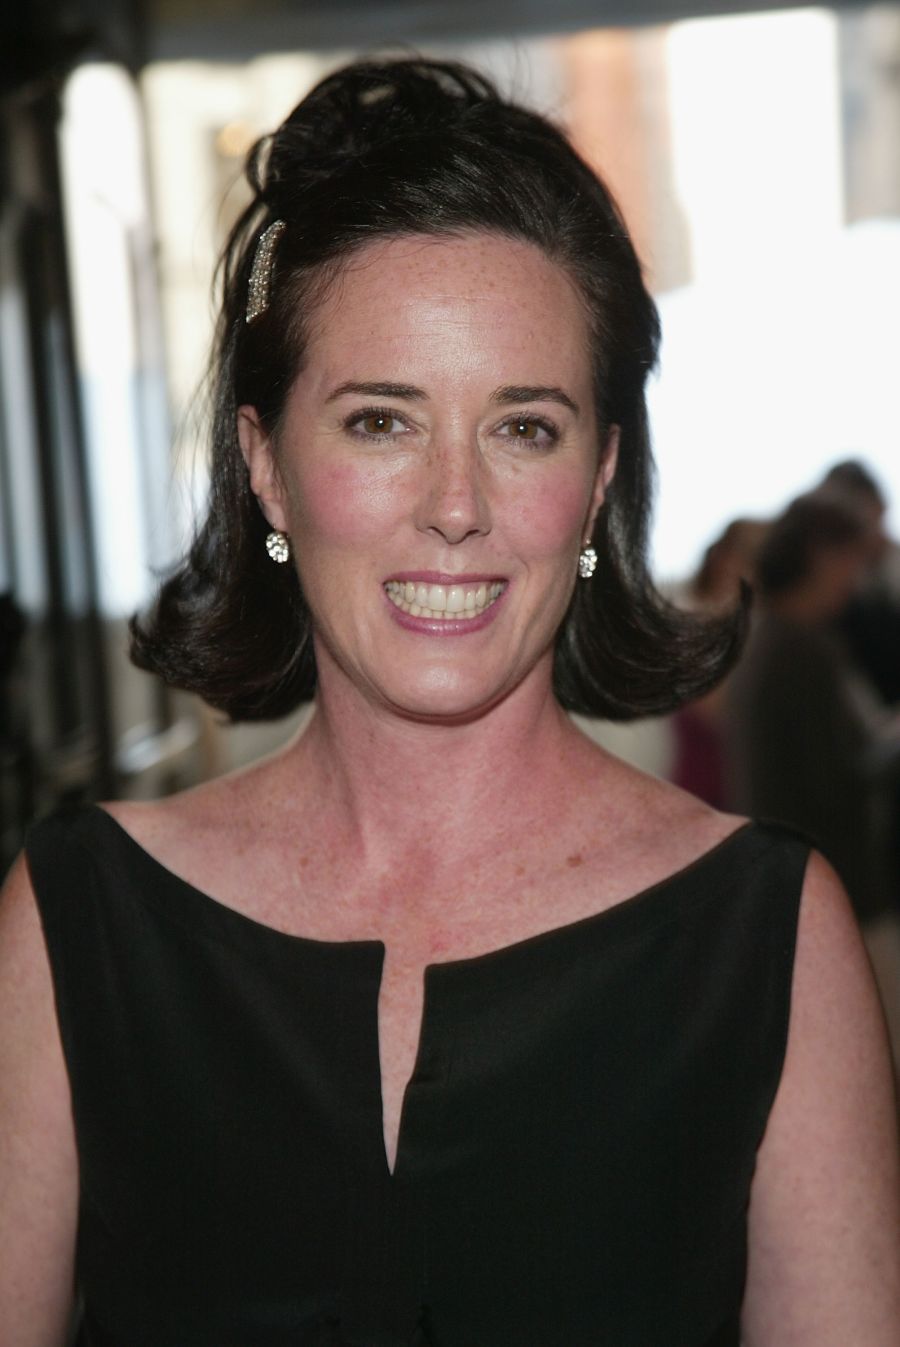 Designer Kate Spade found dead in apparent suicide | Houston Style ...